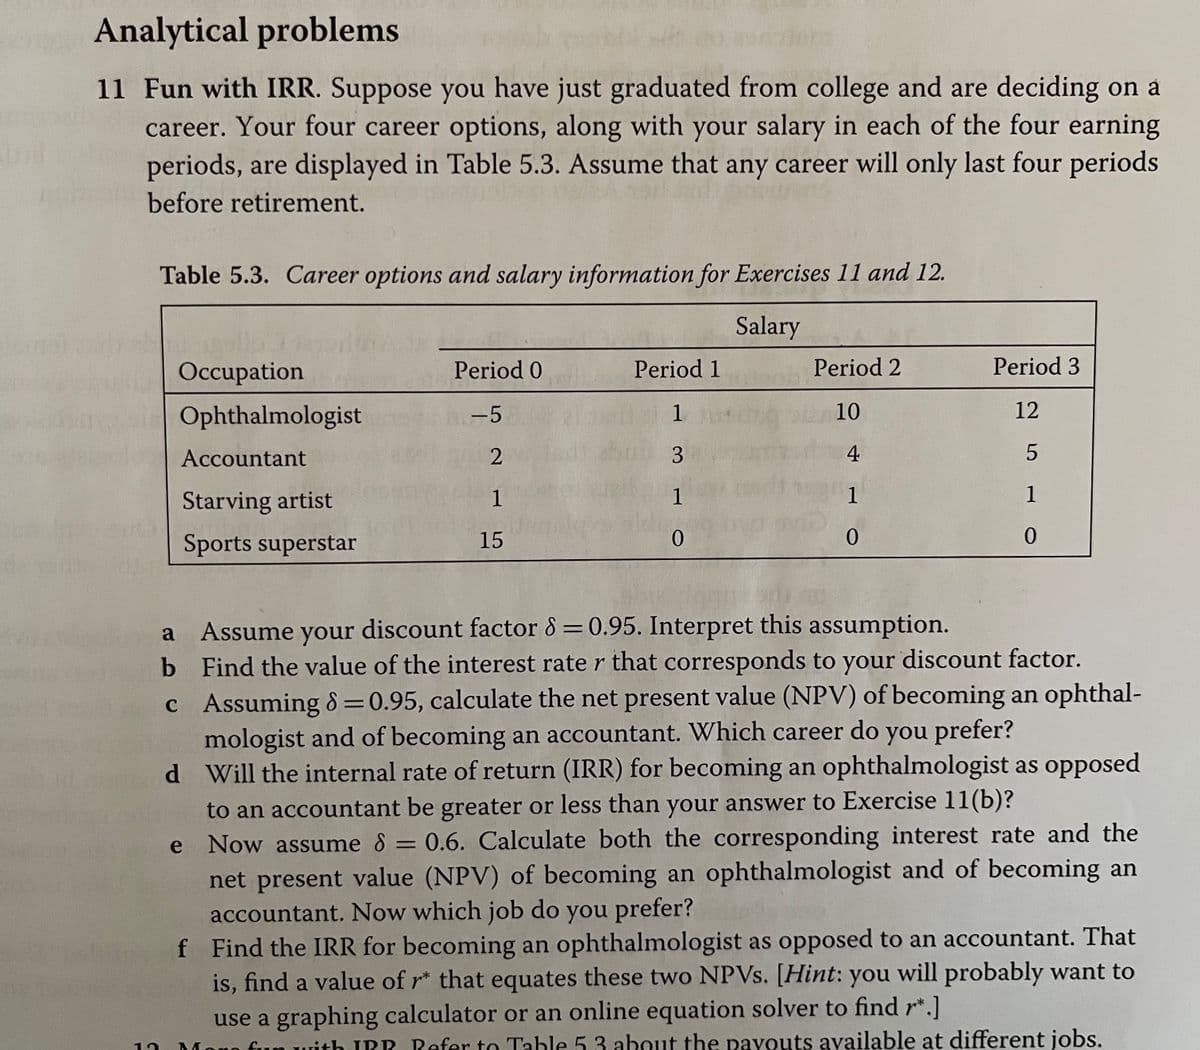 Analytical problems
11 Fun with IRR. Suppose you have just graduated from college and are deciding on a
career. Your four career options, along with your salary in each of the four earning
periods, are displayed in Table 5.3. Assume that any career will only last four periods
before retirement.
Table 5.3. Career options and salary information for Exercises 11 and 12.
Salary
Оccupation
Period 0
Period 1
Period 2
Period 3
Ophthalmologist
-5
1
10
12
Accountant
3
4
Starving artist
1
1
1
1
DND
Sports superstar
15
a Assume your discount factor 8 =0.95. Interpret this assumption.
b Find the value of the interest rate r that corresponds to your discount factor.
c Assuming 8=0.95, calculate the net present value (NPV) of becoming an ophthal-
mologist and of becoming an accountant. Which career do you prefer?
d Will the internal rate of return (IRR) for becoming an ophthalmologist as opposed
%3D
to an accountant be greater or less than your answer to Exercise 11(b)?
e Now assume 8 = 0.6. Calculate both the corresponding interest rate and the
net present value (NPV) of becoming an ophthalmologist and of becoming an
accountant. Now which job do you prefer?
f Find the IRR for becoming an ophthalmologist as opposed to an accountant. That
is, find a value of r* that equates these two NPVS. [Hint: you will probably want to
use a graphing calculator or an online equation solver to find r*.]
Moro fun uith IRP Pefer to Tahle 5 3 about the payouts available at different jobs.
%3D
2.
